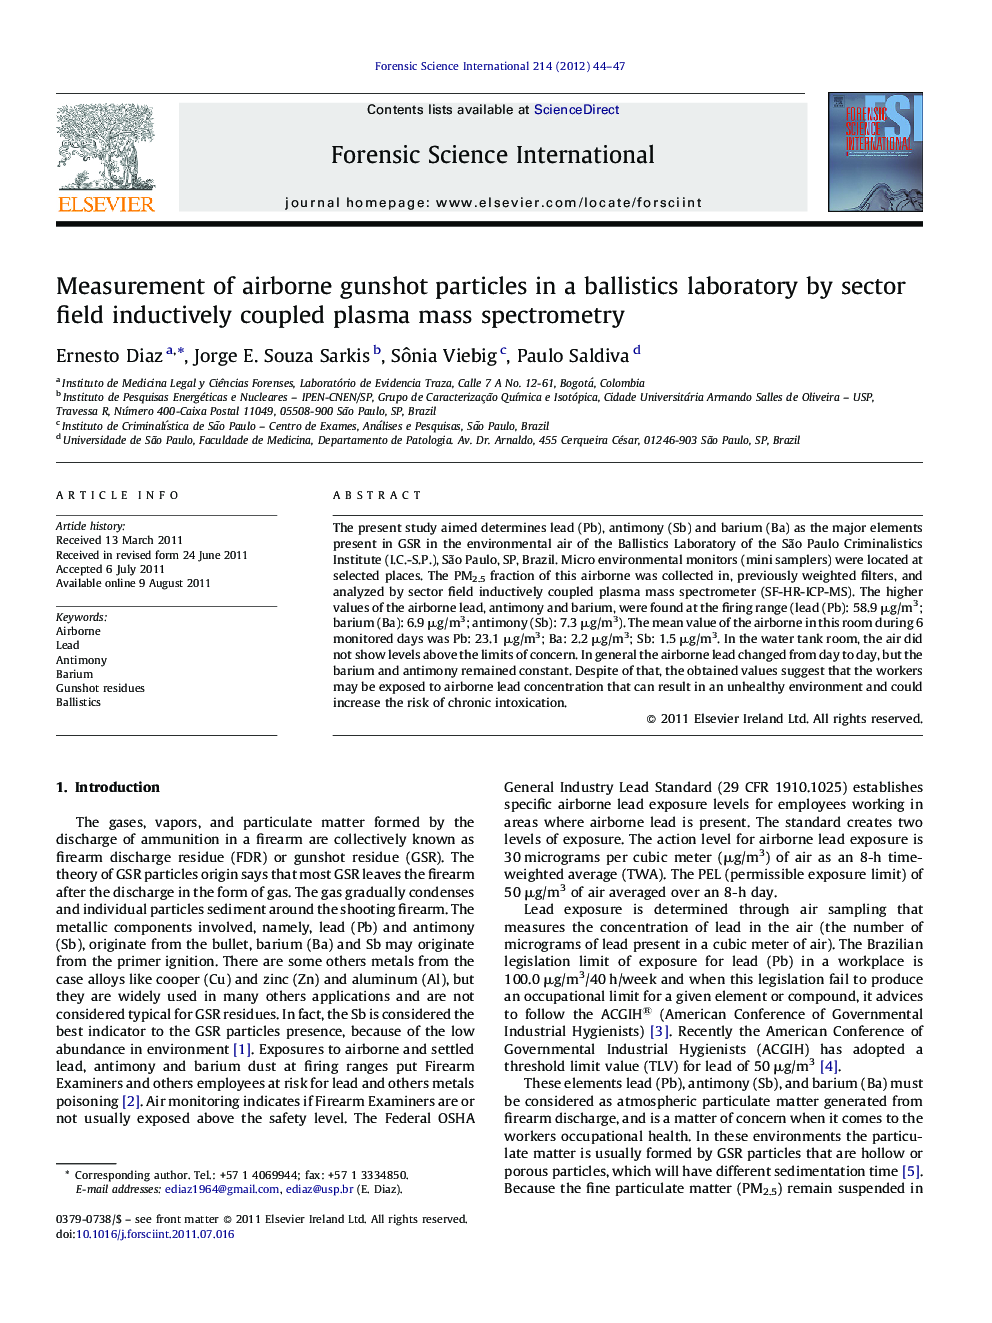 Measurement of airborne gunshot particles in a ballistics laboratory by sector field inductively coupled plasma mass spectrometry